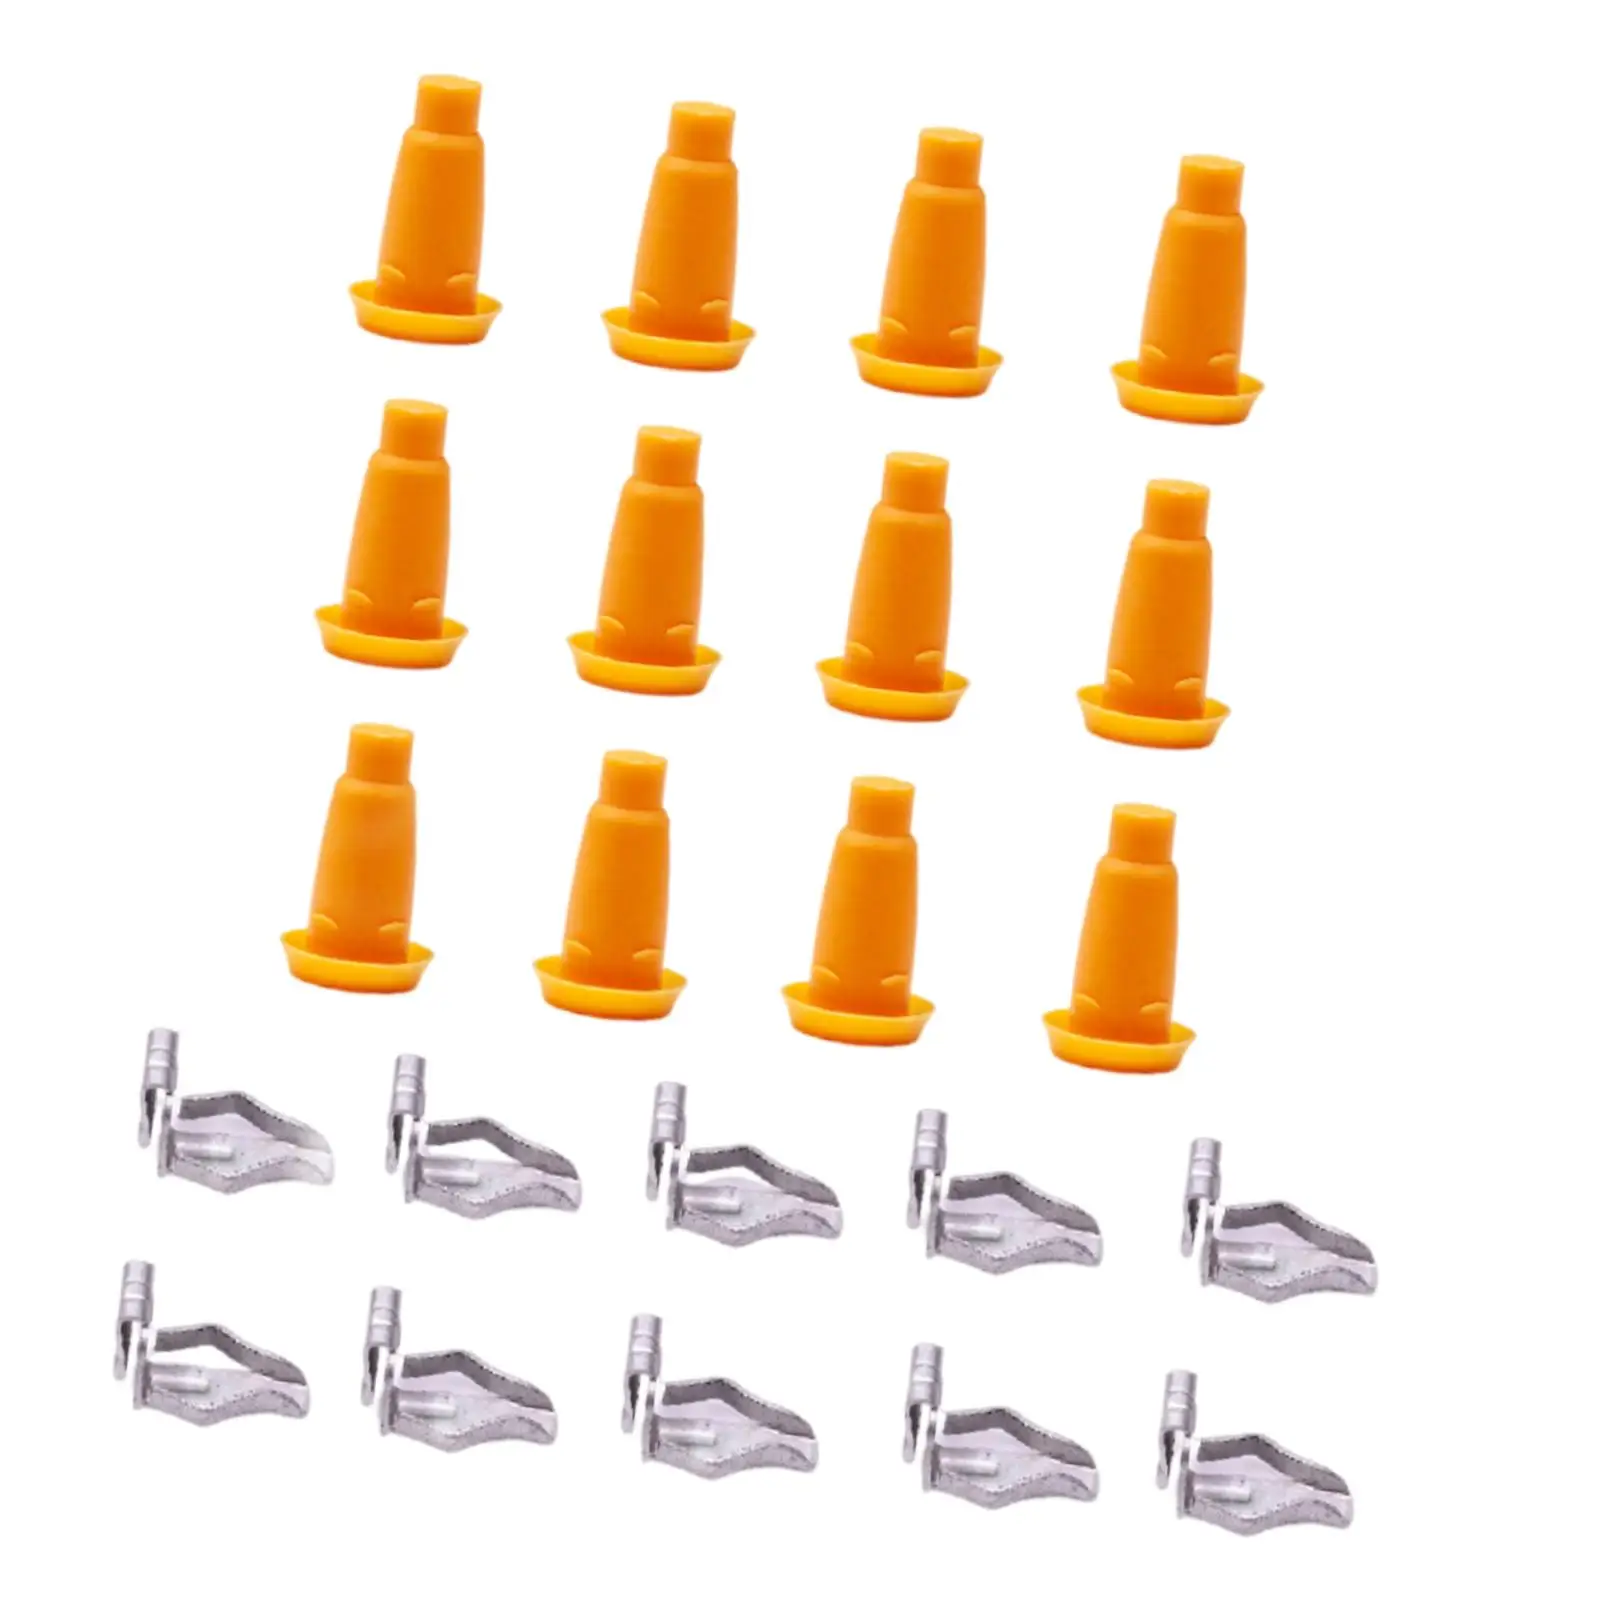 24Pcs Door Panel Frame Plugs & Clips Replacement 4500027 4853962 for Chevy Camaro Nova Chevelle Fullsize Stable Performance